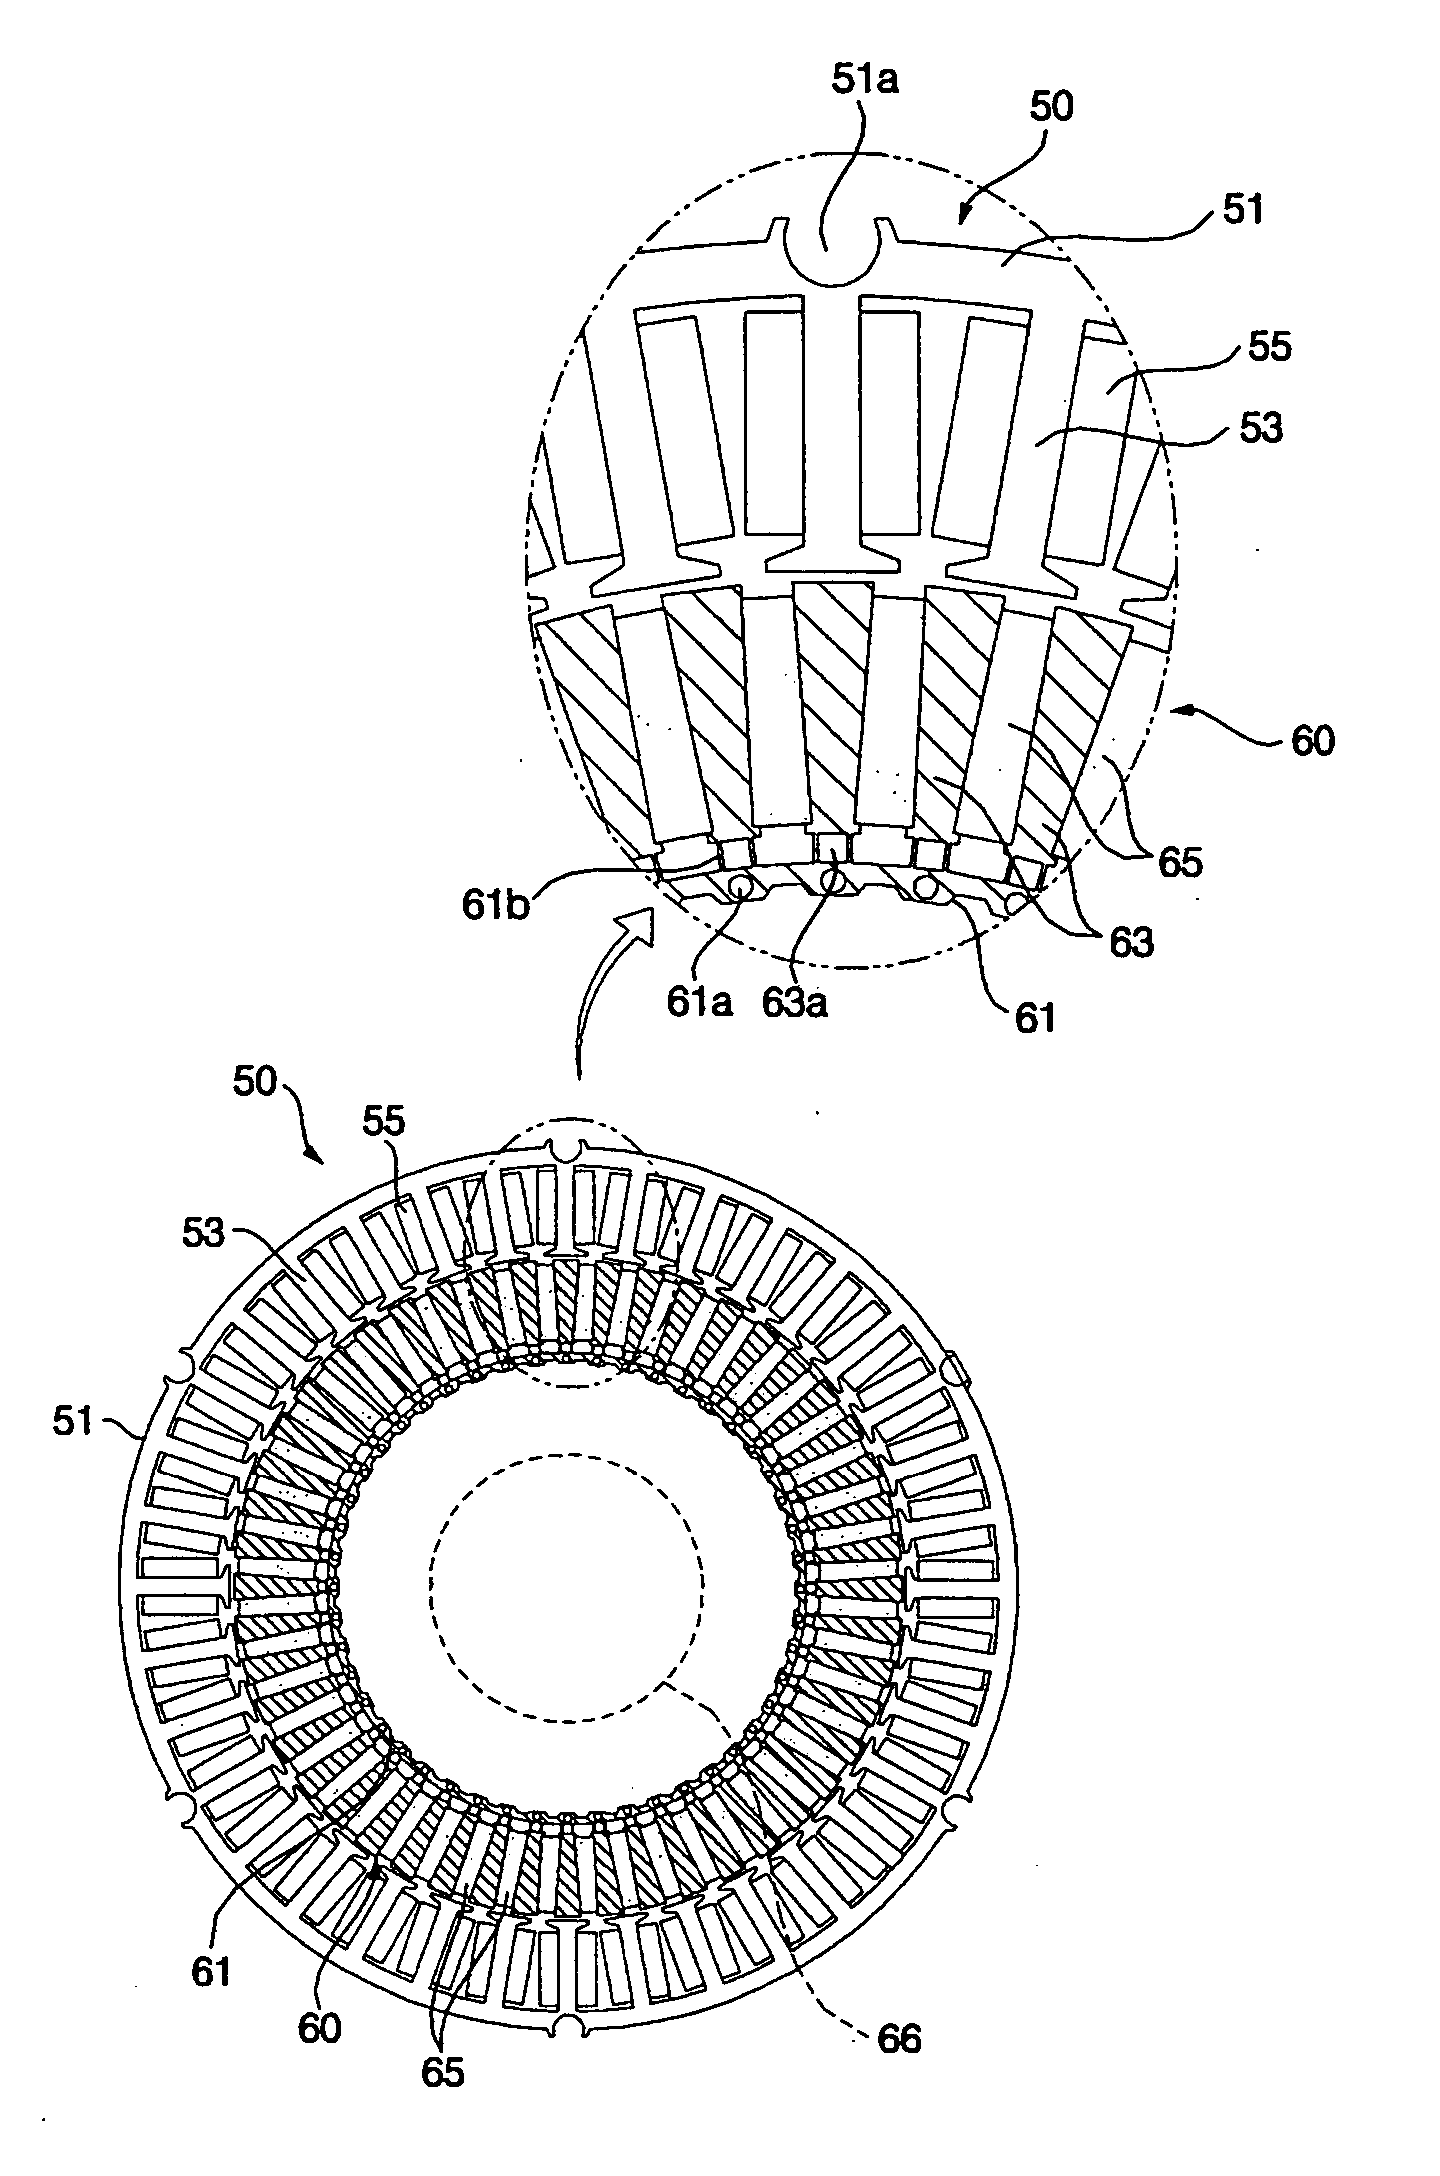 Flux concentrated-type motor